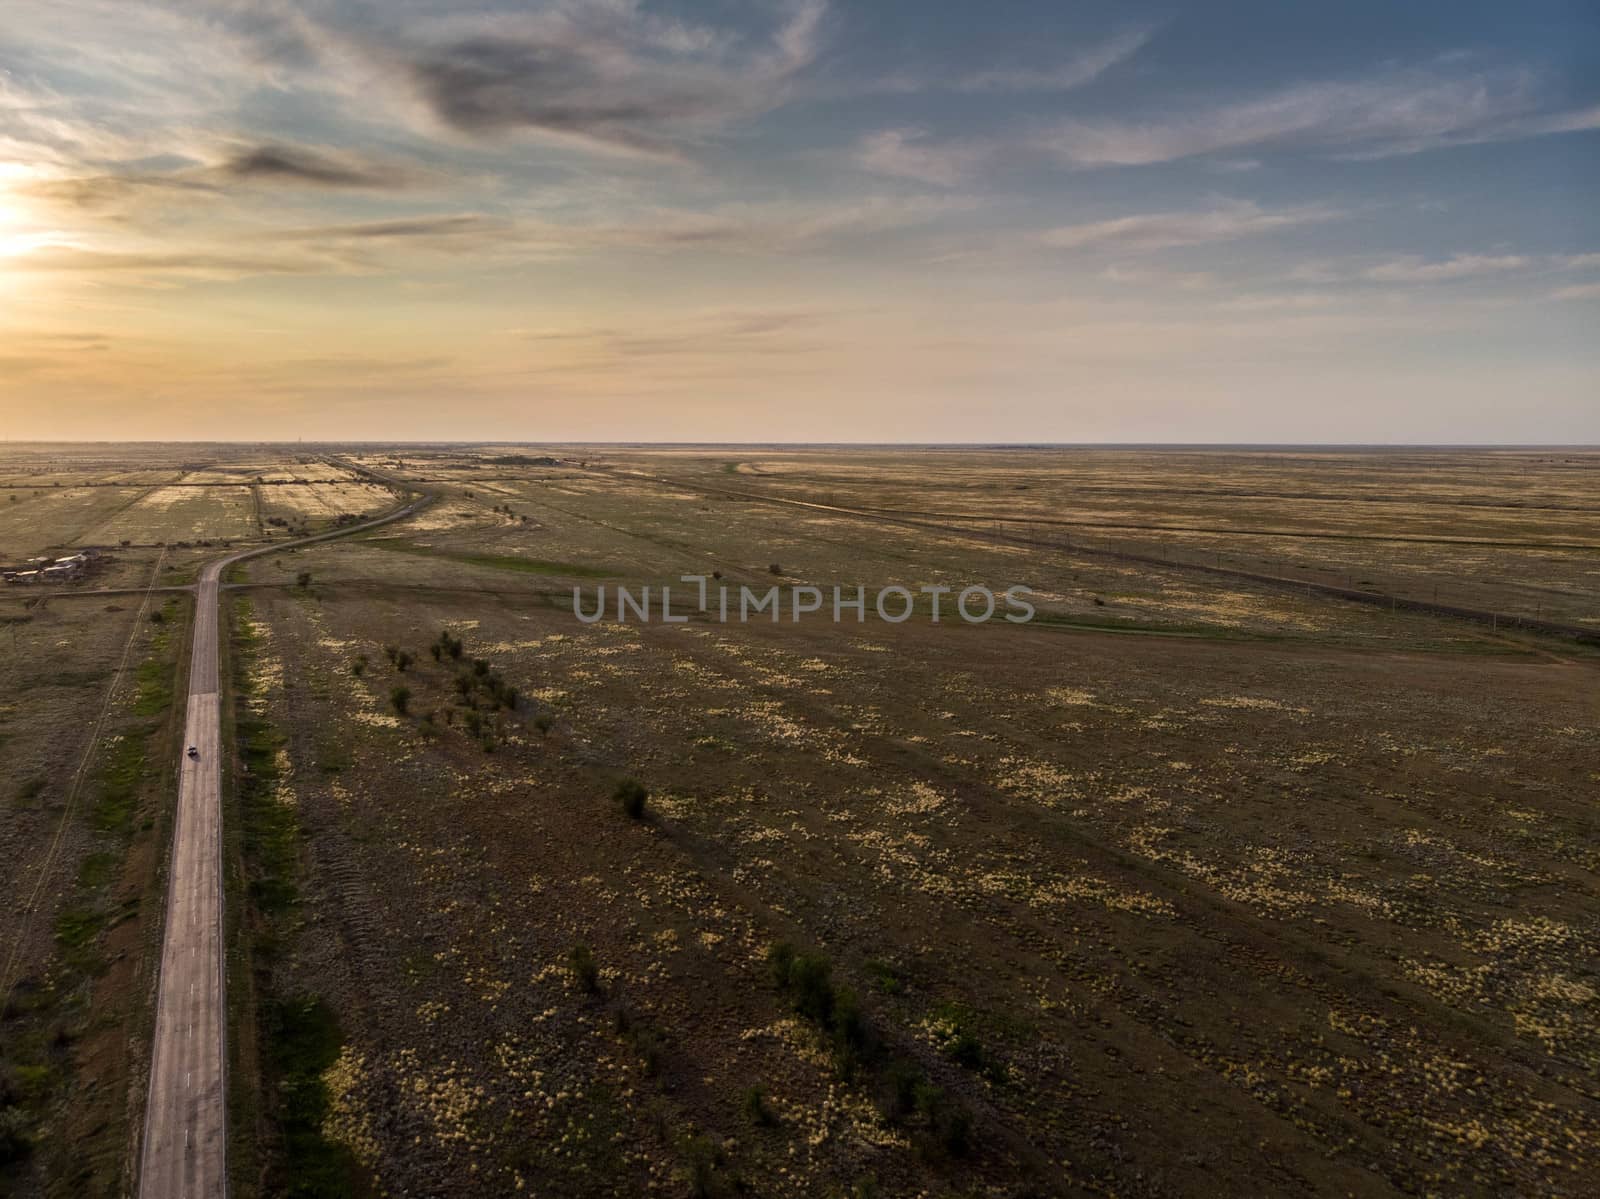 Empty asphalt road goes into the distance on sunset by marynkin